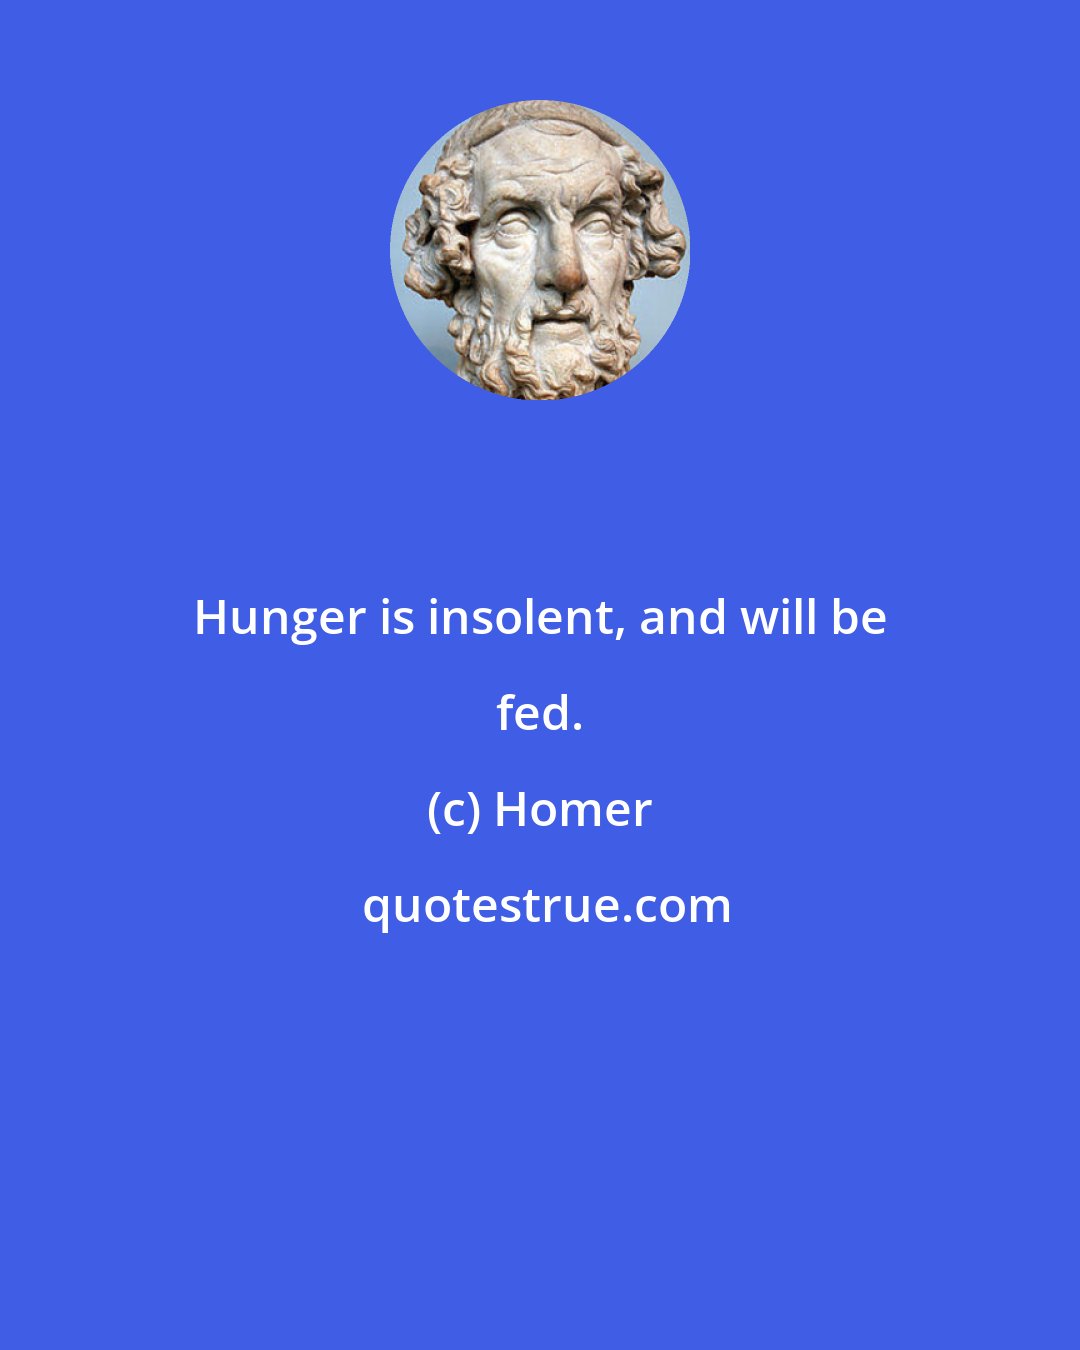 Homer: Hunger is insolent, and will be fed.